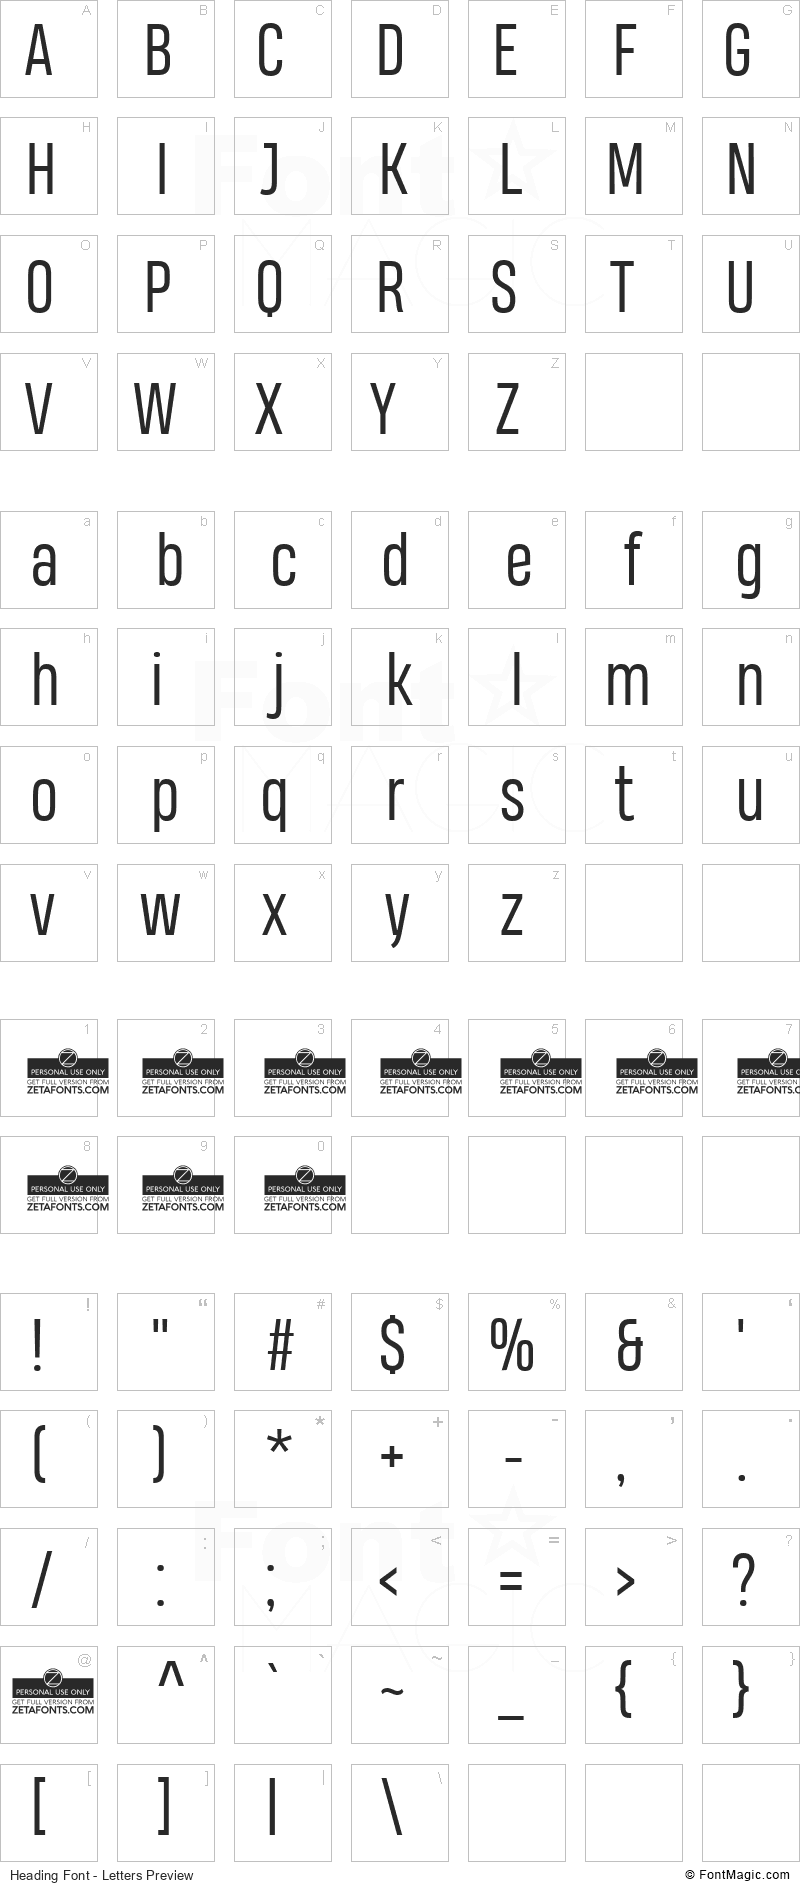 Heading Font - All Latters Preview Chart